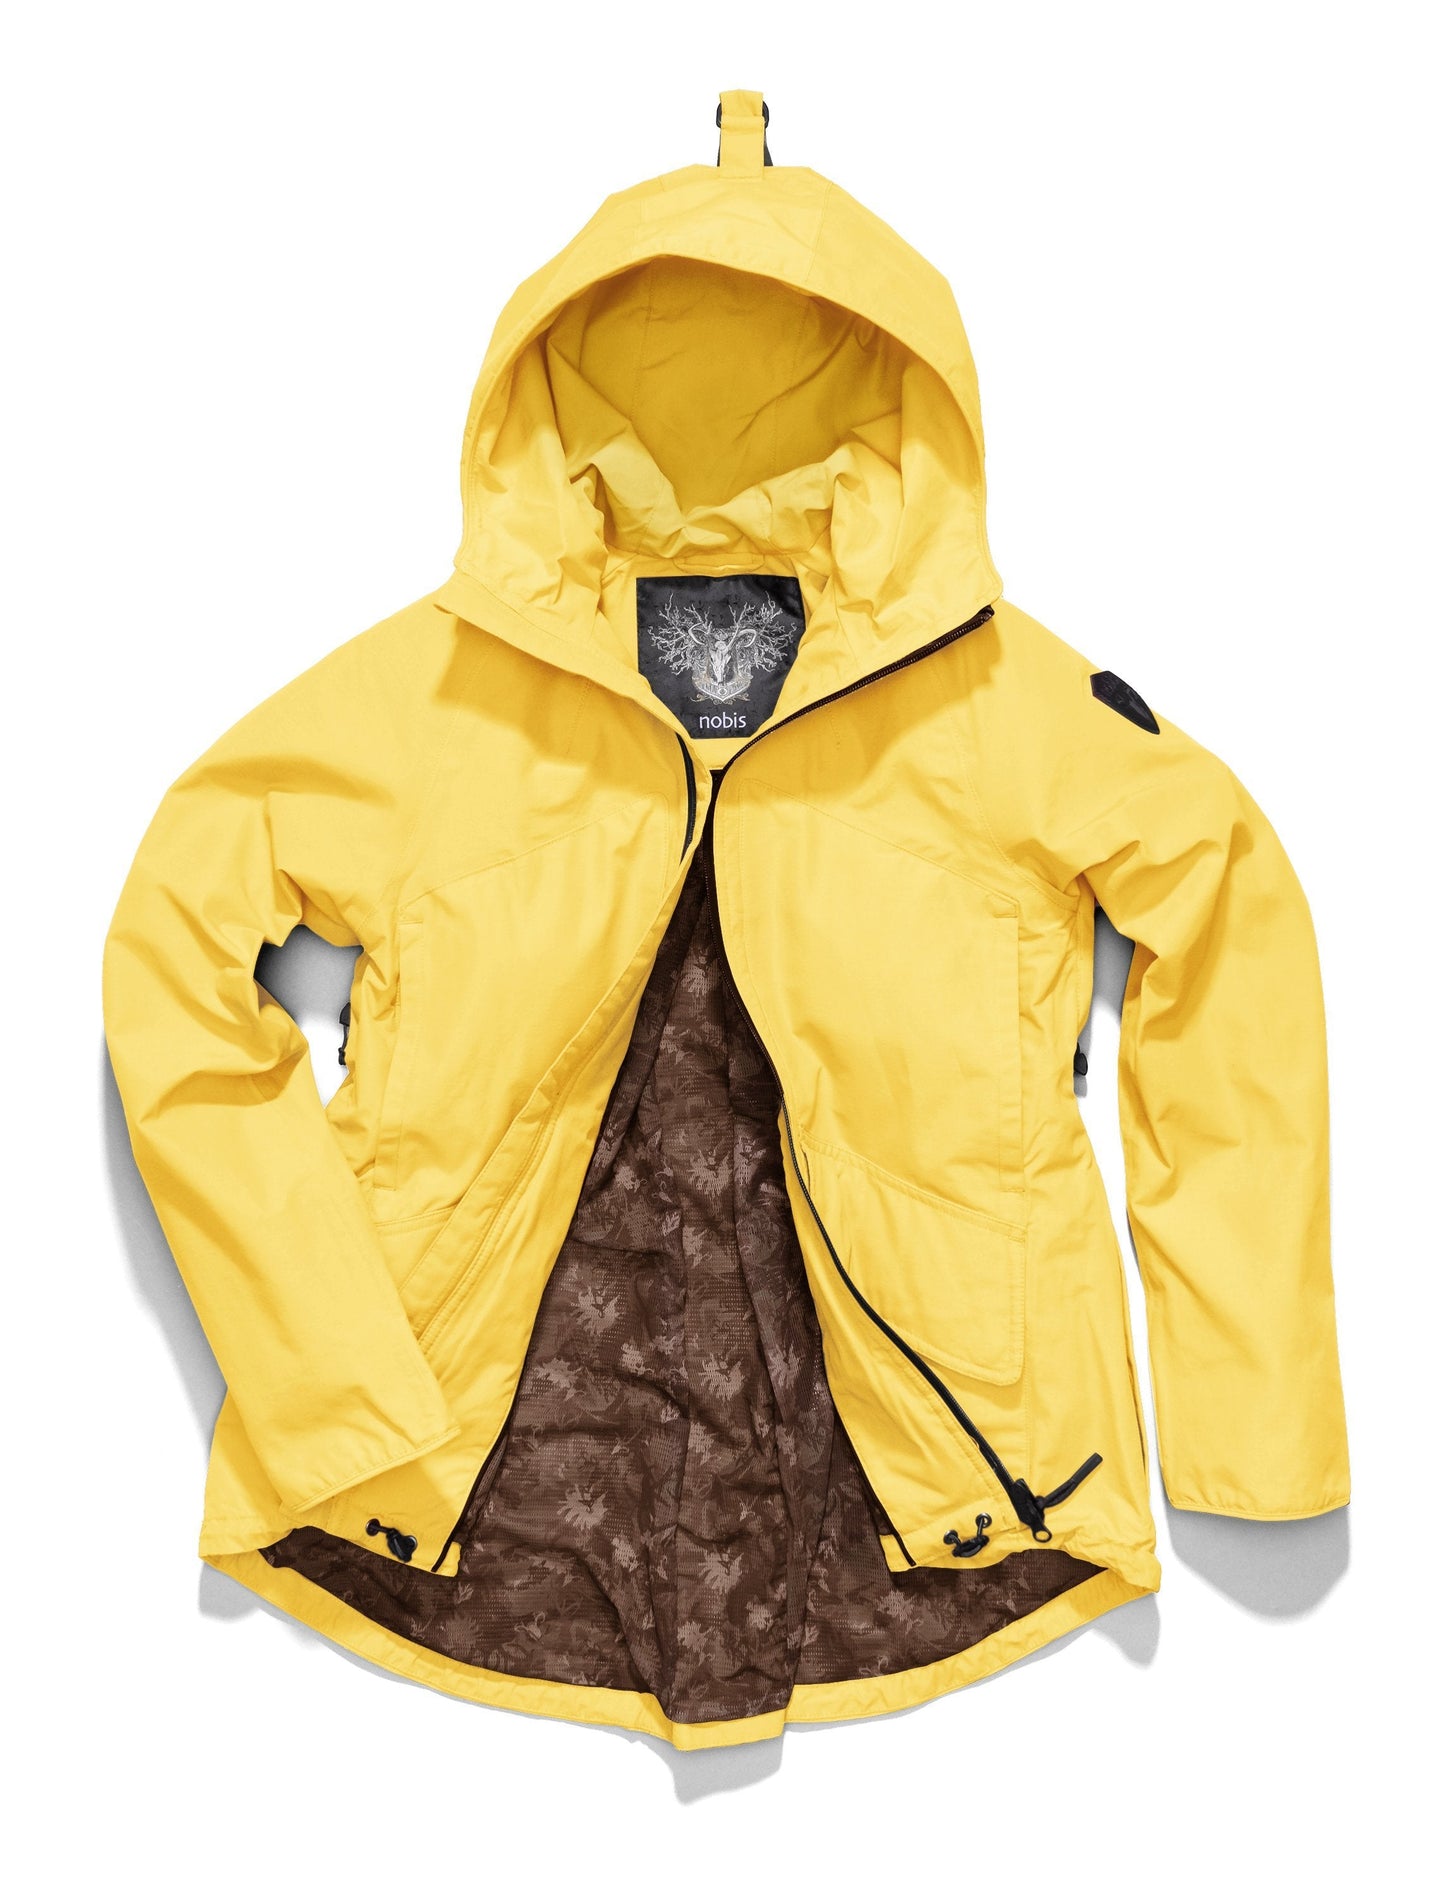 Women's hooded rain jacket with high low hem in Citron